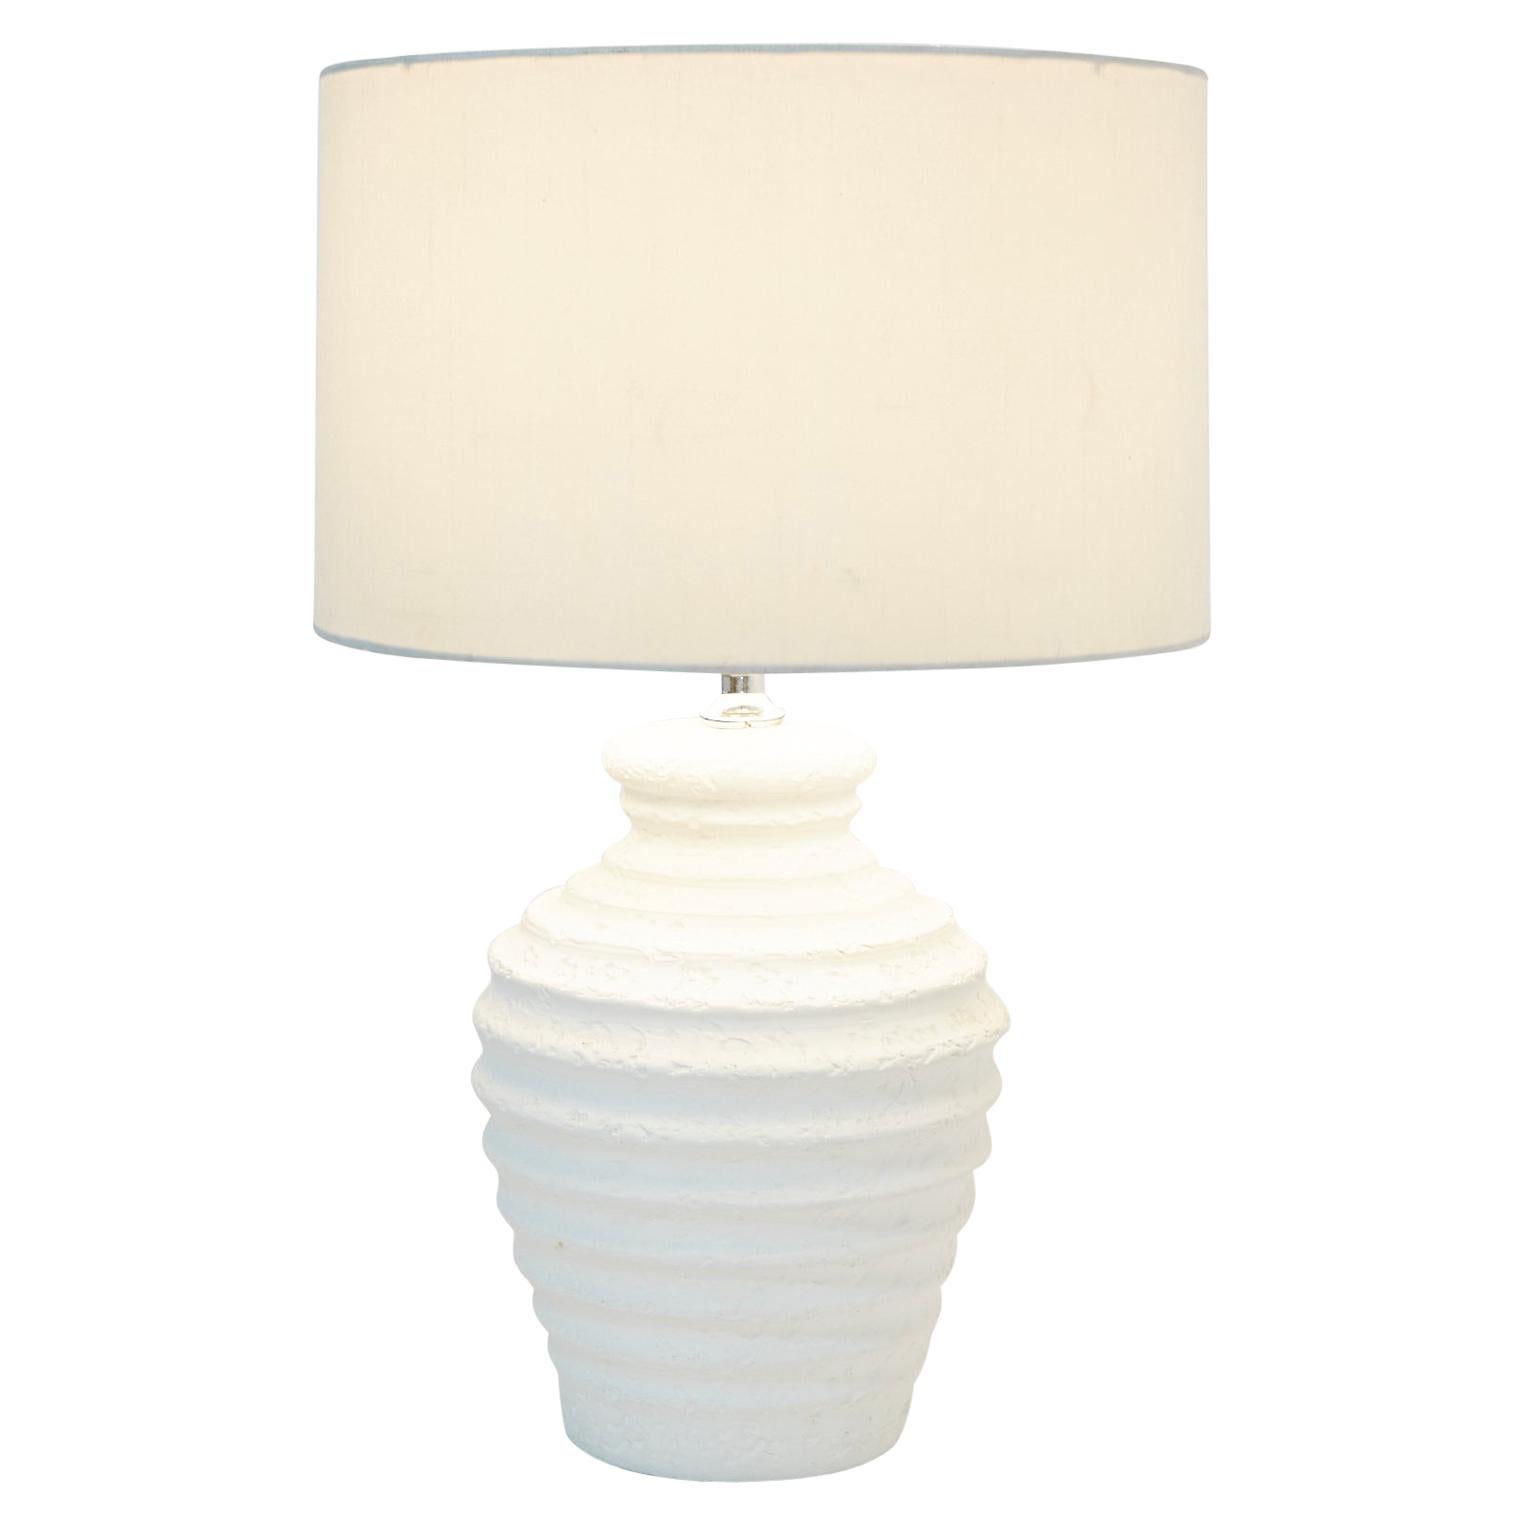 Postmodern Distressed Plaster Ribbed Table Lamp by Elite, 1993 For Sale